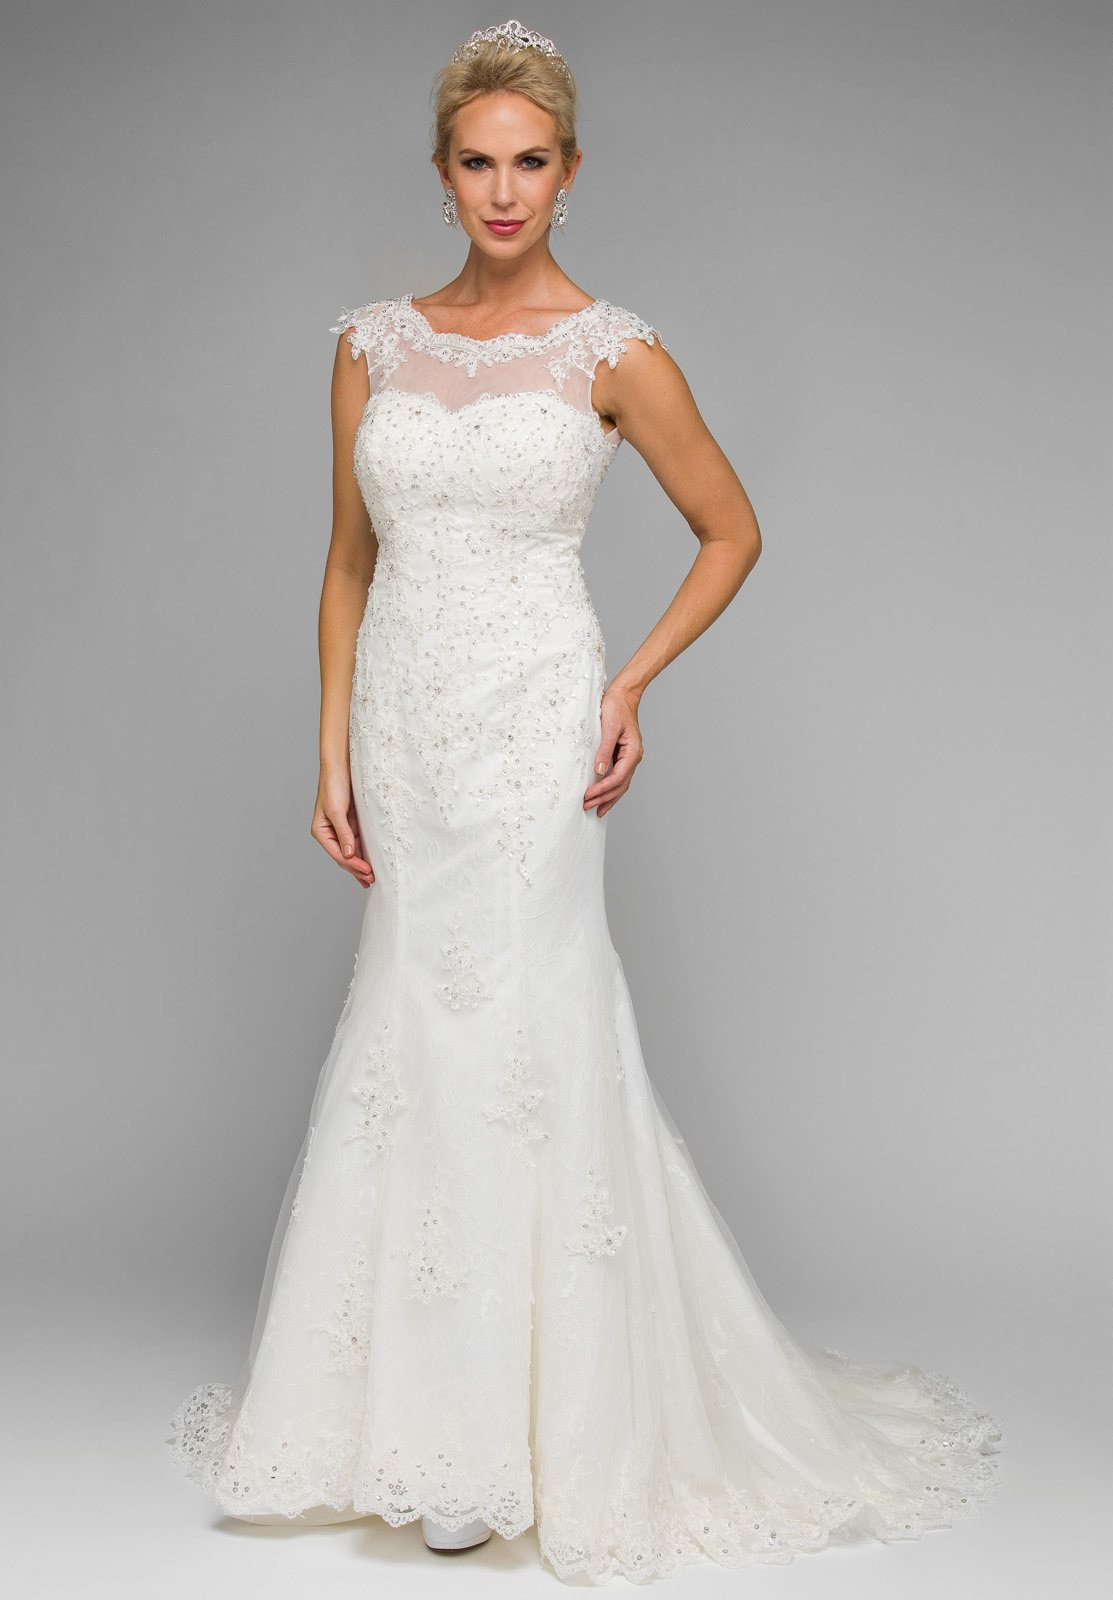 Sweetheart Wedding Gown
 White Illusion Sweetheart Neckline Beaded Wedding Gown